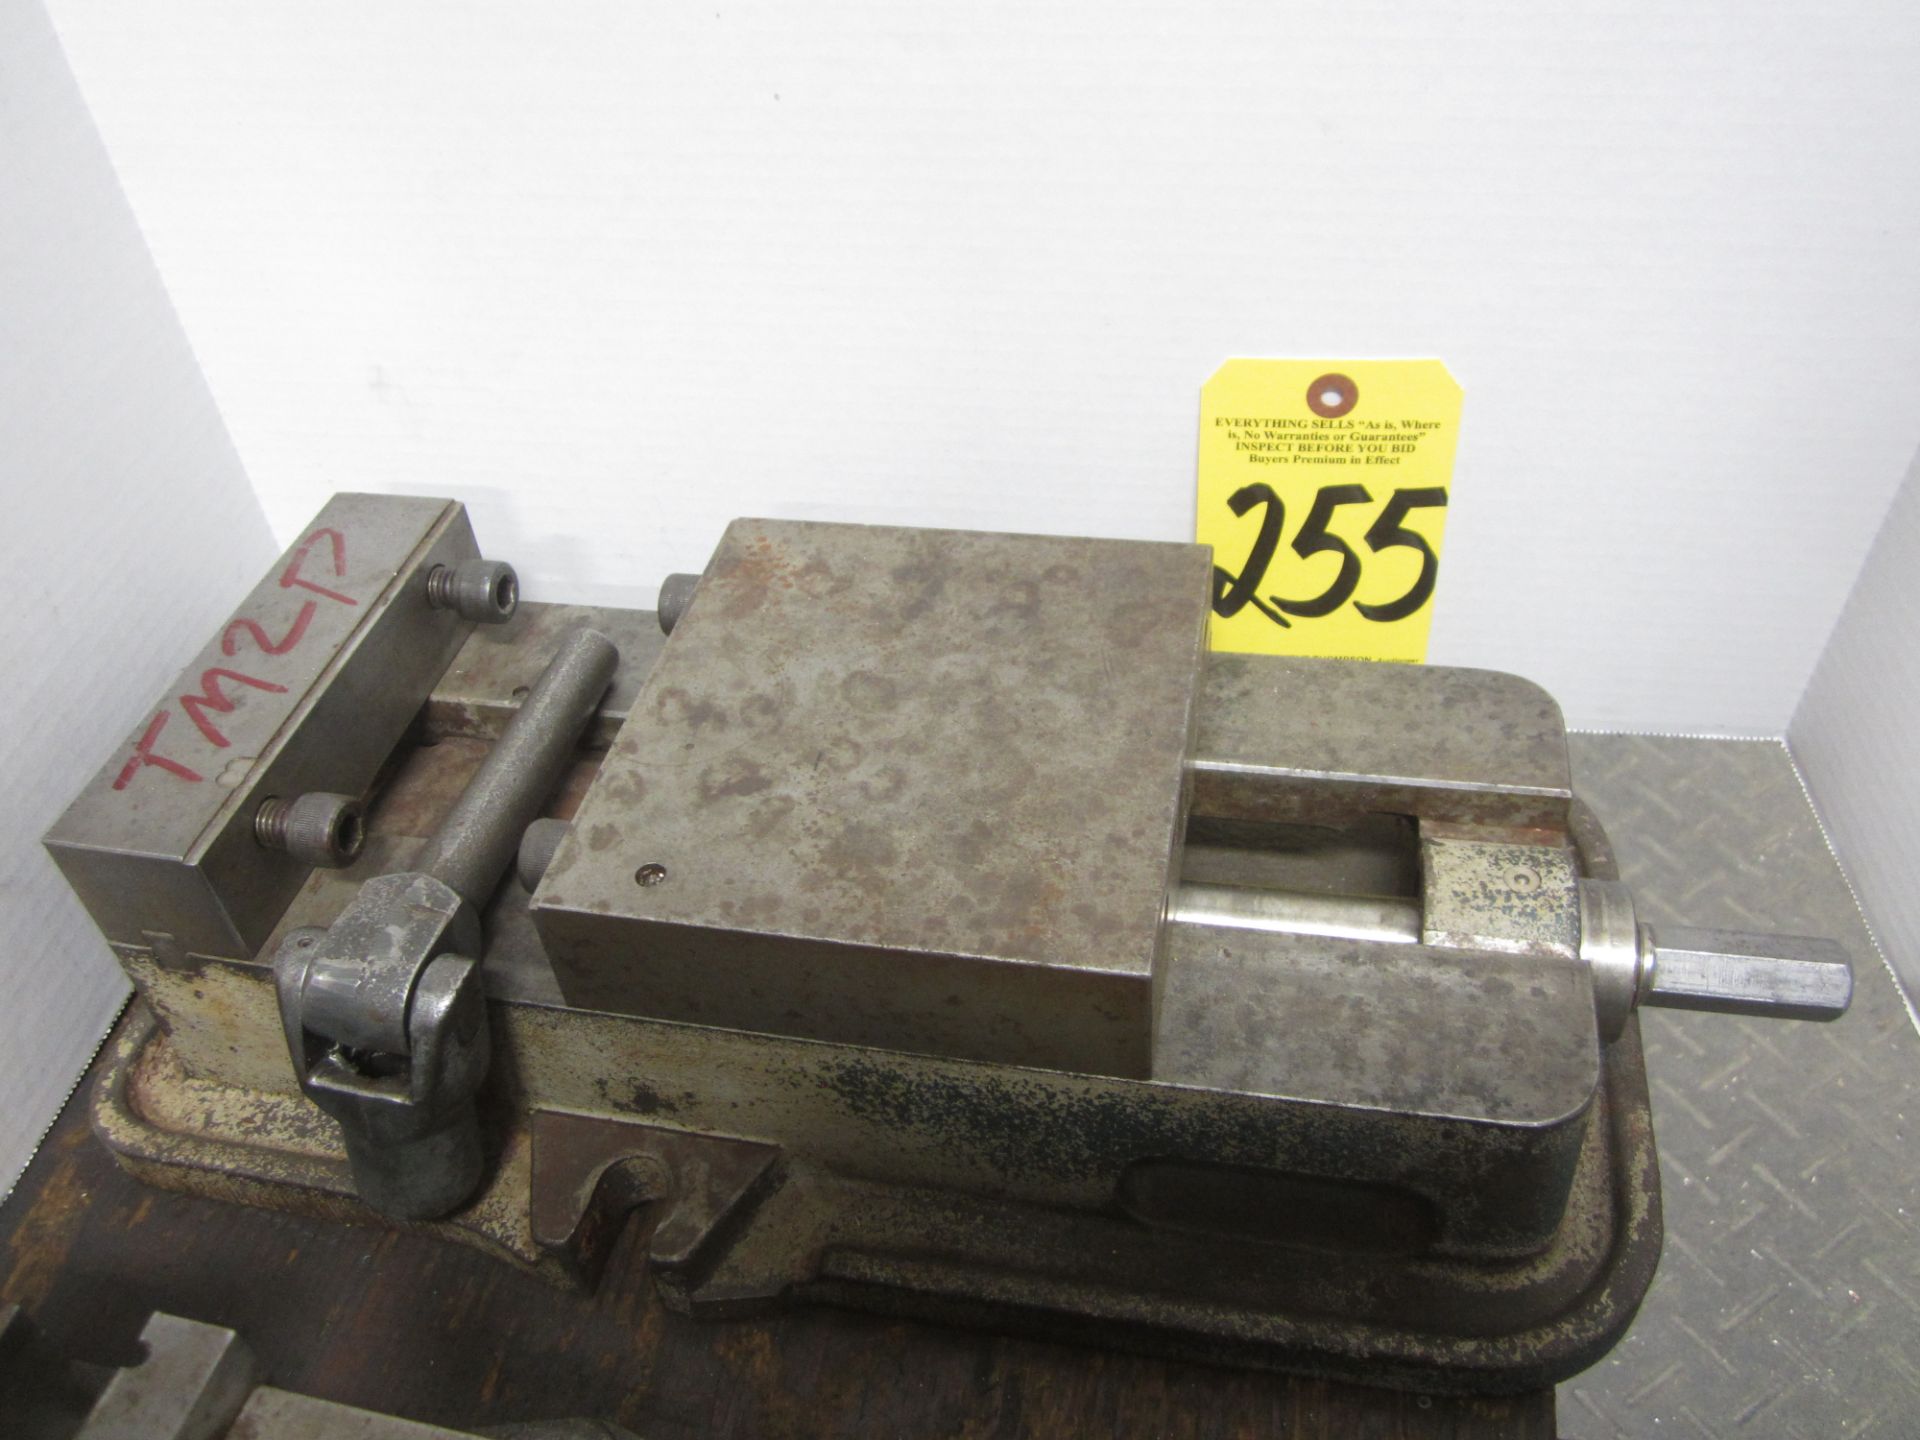 6 Inch Mill Vise